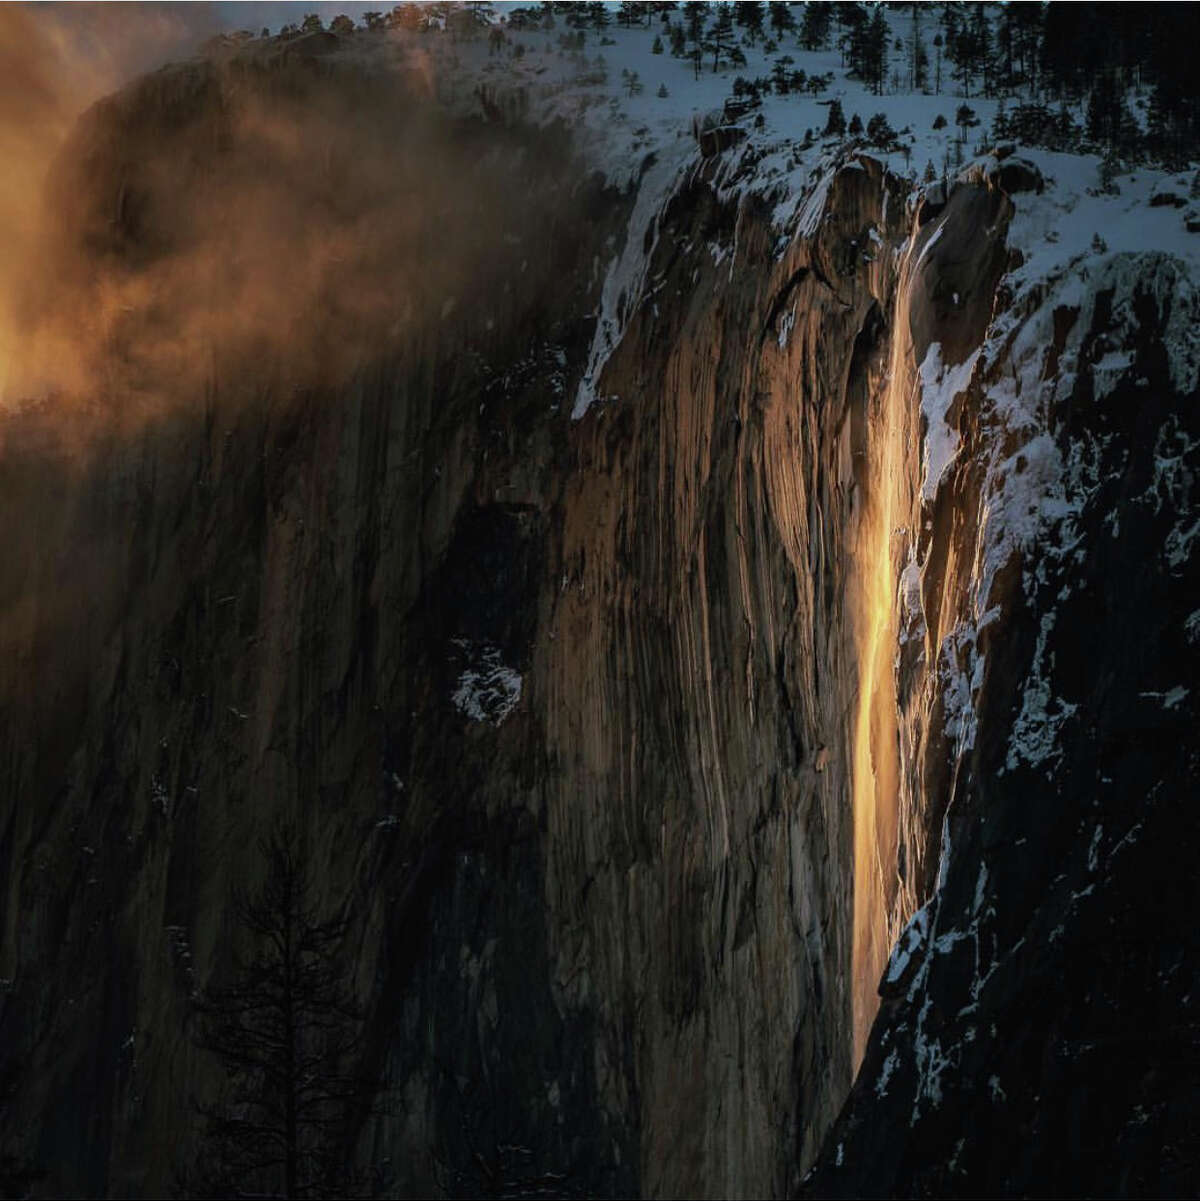 The Horsetail Fall natural phenomenon commonly known as "firefall" in Yosemite National Park captured on Monday, Feb. 18, 2019. The lava-like effect only occurs in mid-late February when the setting sun hits the waterfall at exactly the right angle.